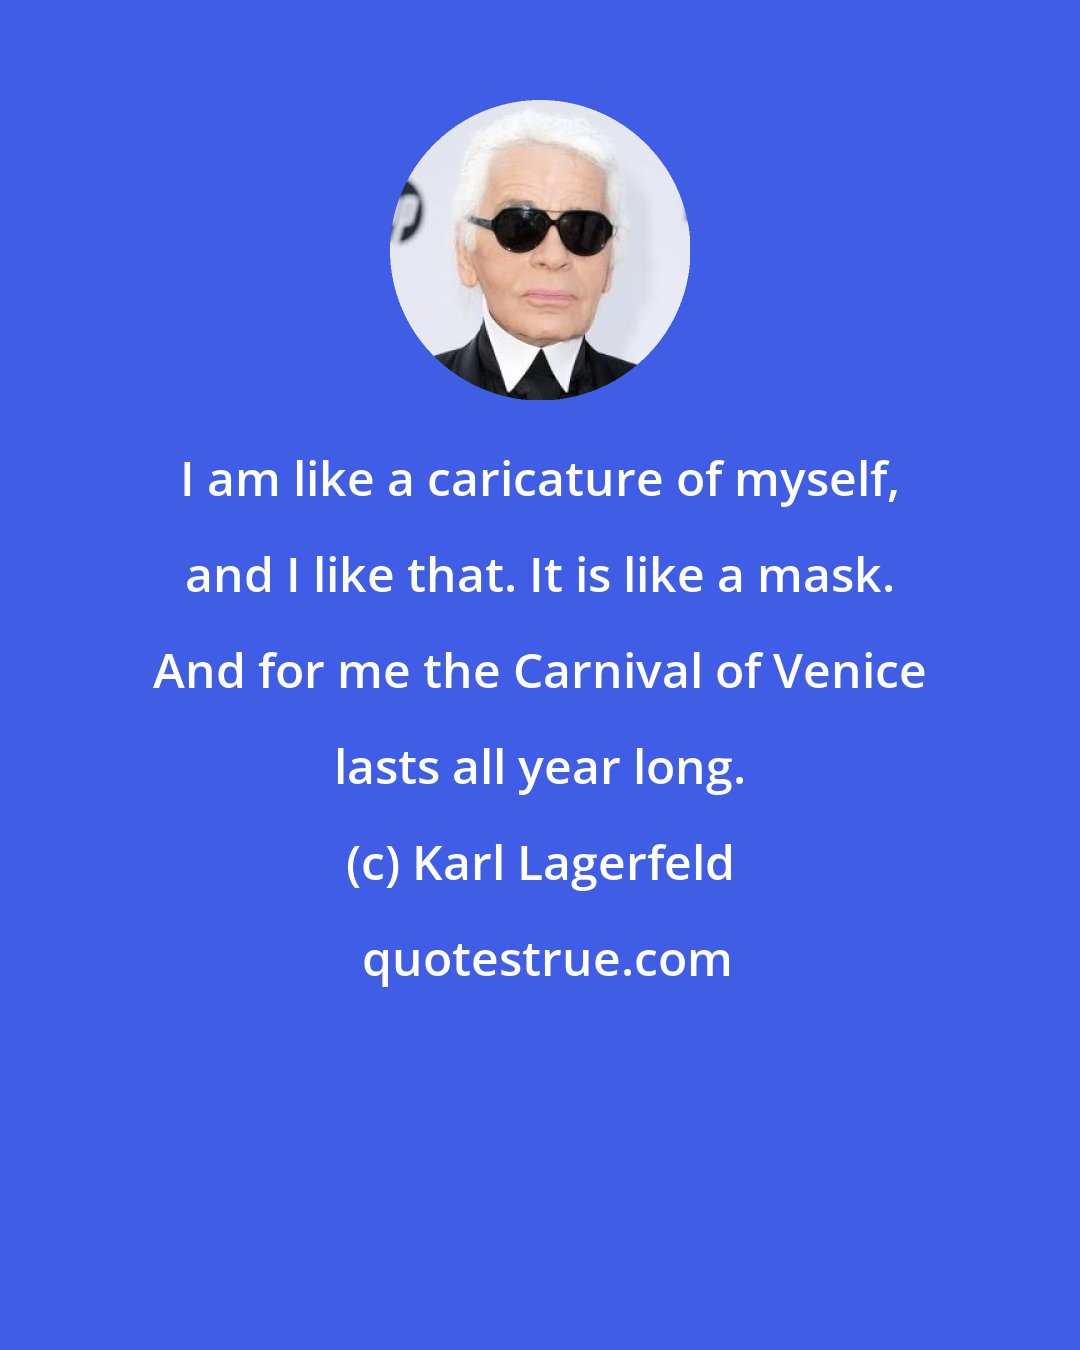 Karl Lagerfeld: I am like a caricature of myself, and I like that. It is like a mask. And for me the Carnival of Venice lasts all year long.